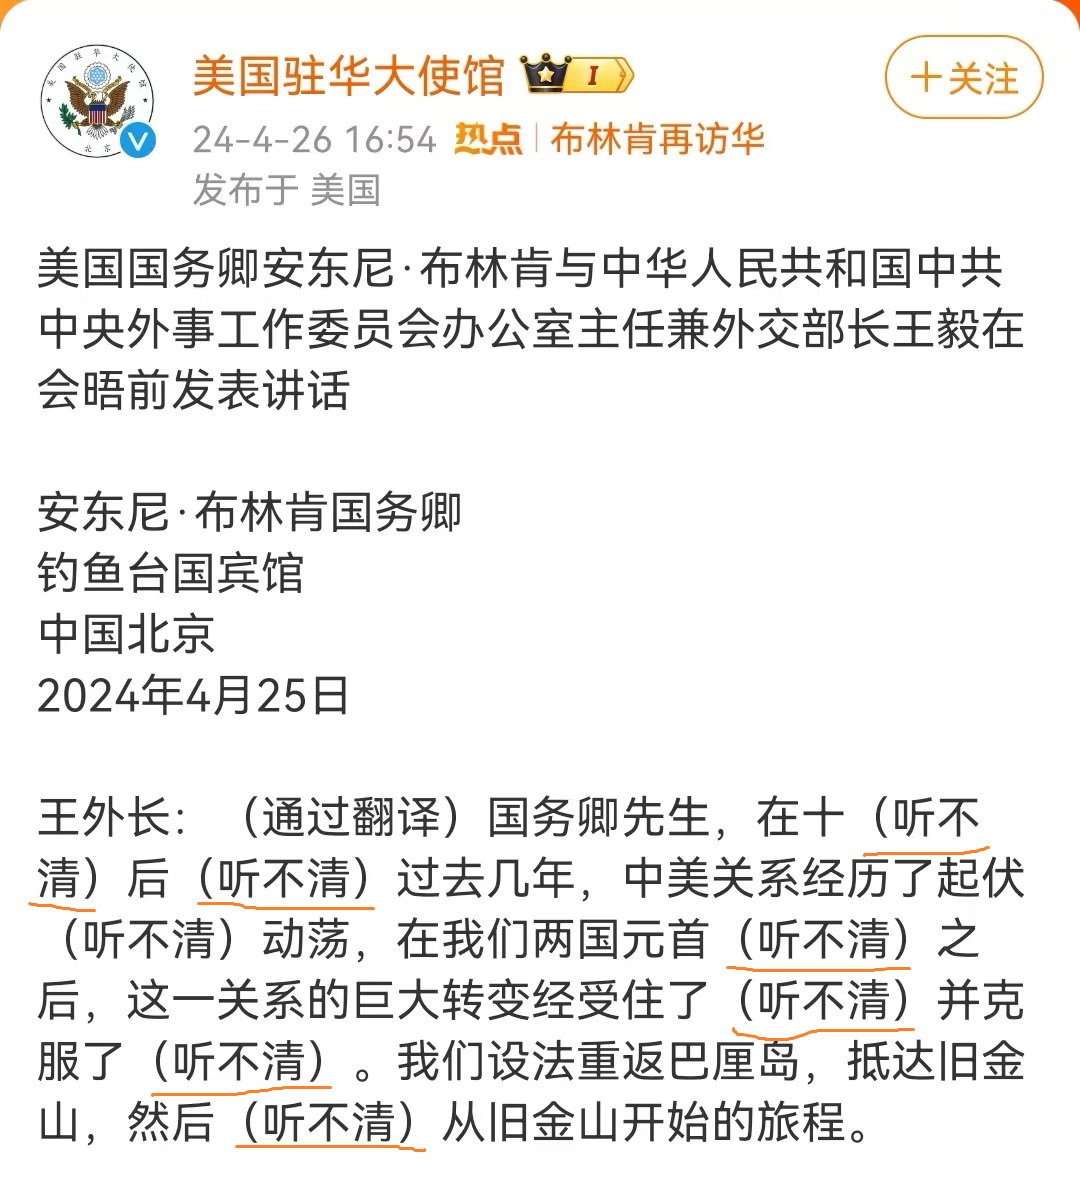 This is fun. In the conversation record between Wang Yi and Antony Blinken published on Weibo from the US Embassy, there are six marks (inaudible). It seems that the US needs to hire better translators.